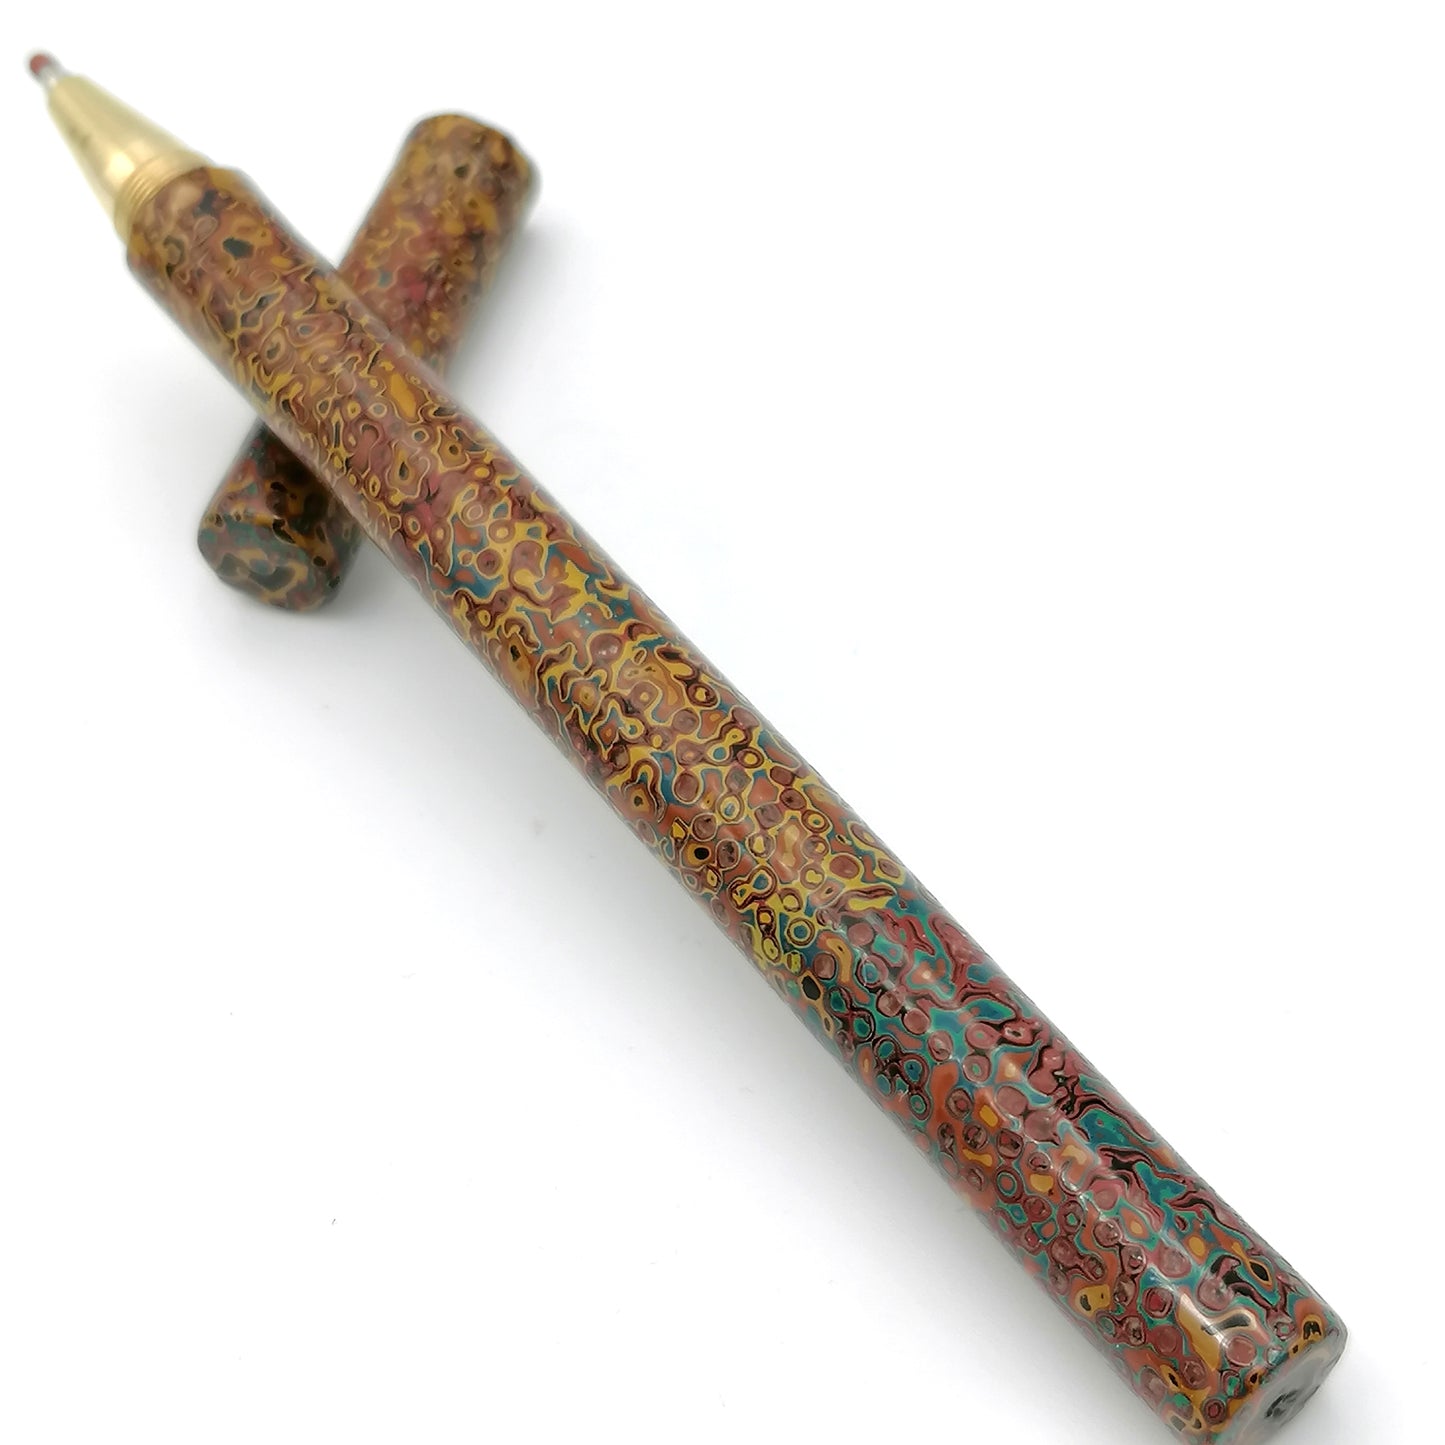 Nanako-Nuri Solid Brass Pen in oranges reds blues and yellows